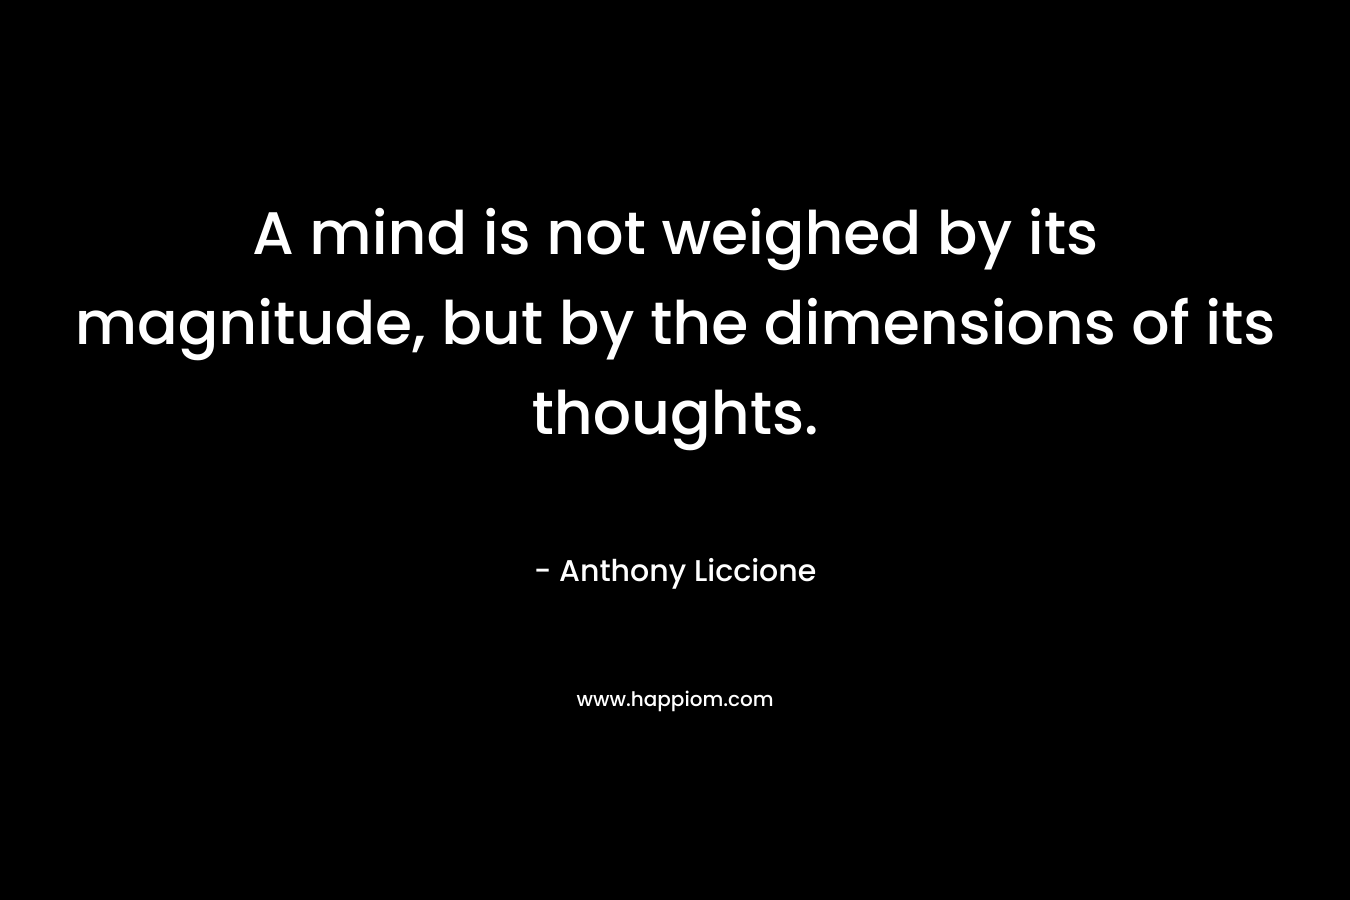 A mind is not weighed by its magnitude, but by the dimensions of its thoughts. – Anthony Liccione